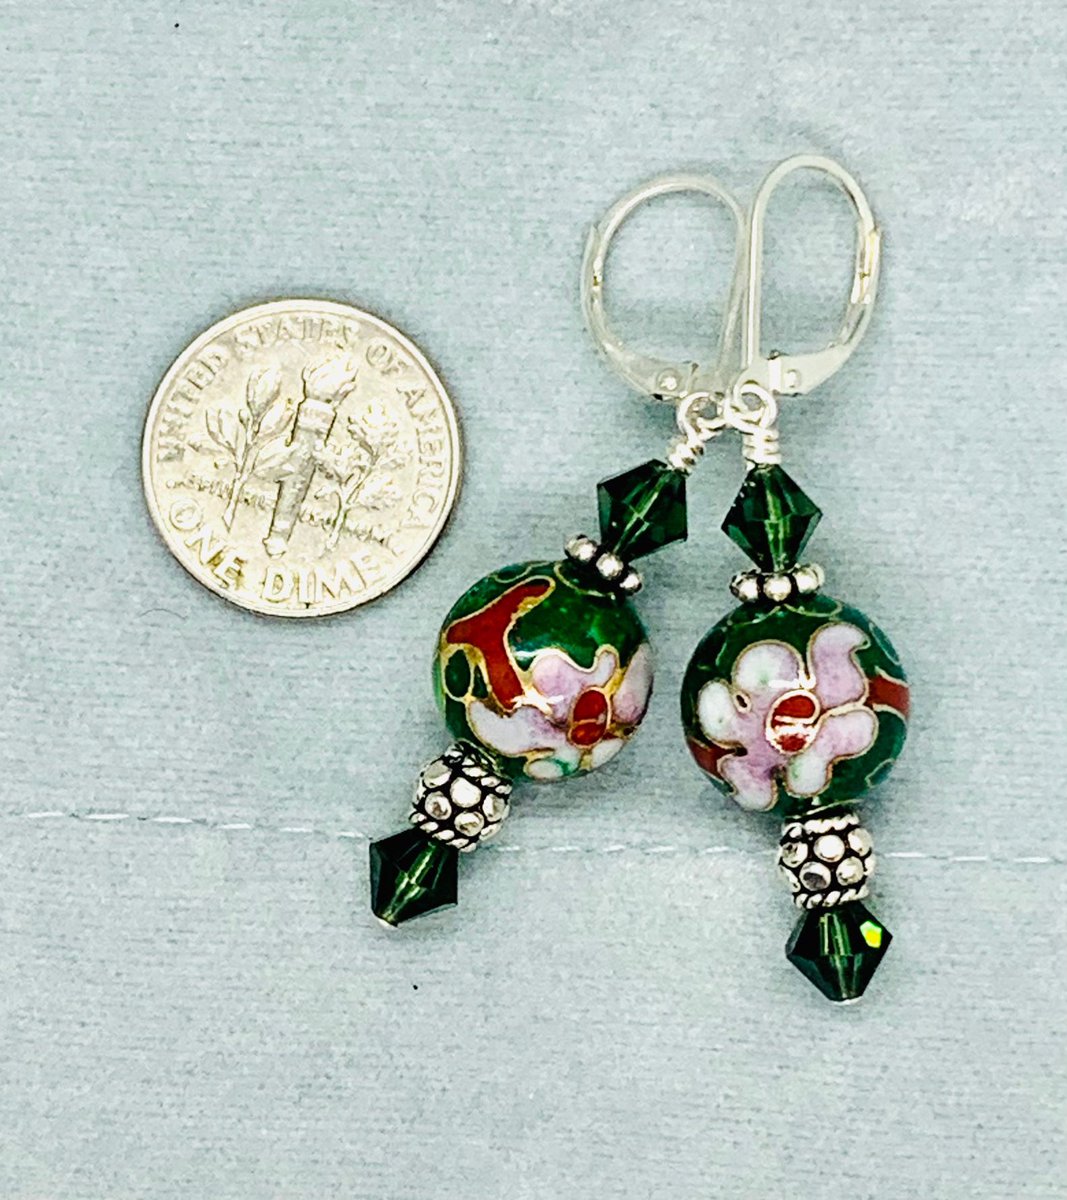 Available at: ShoshJewelsNYC.etsy.com #christmas gifts  #etsy #cloisonneearrings #presents etsy.me/3lMNtkd